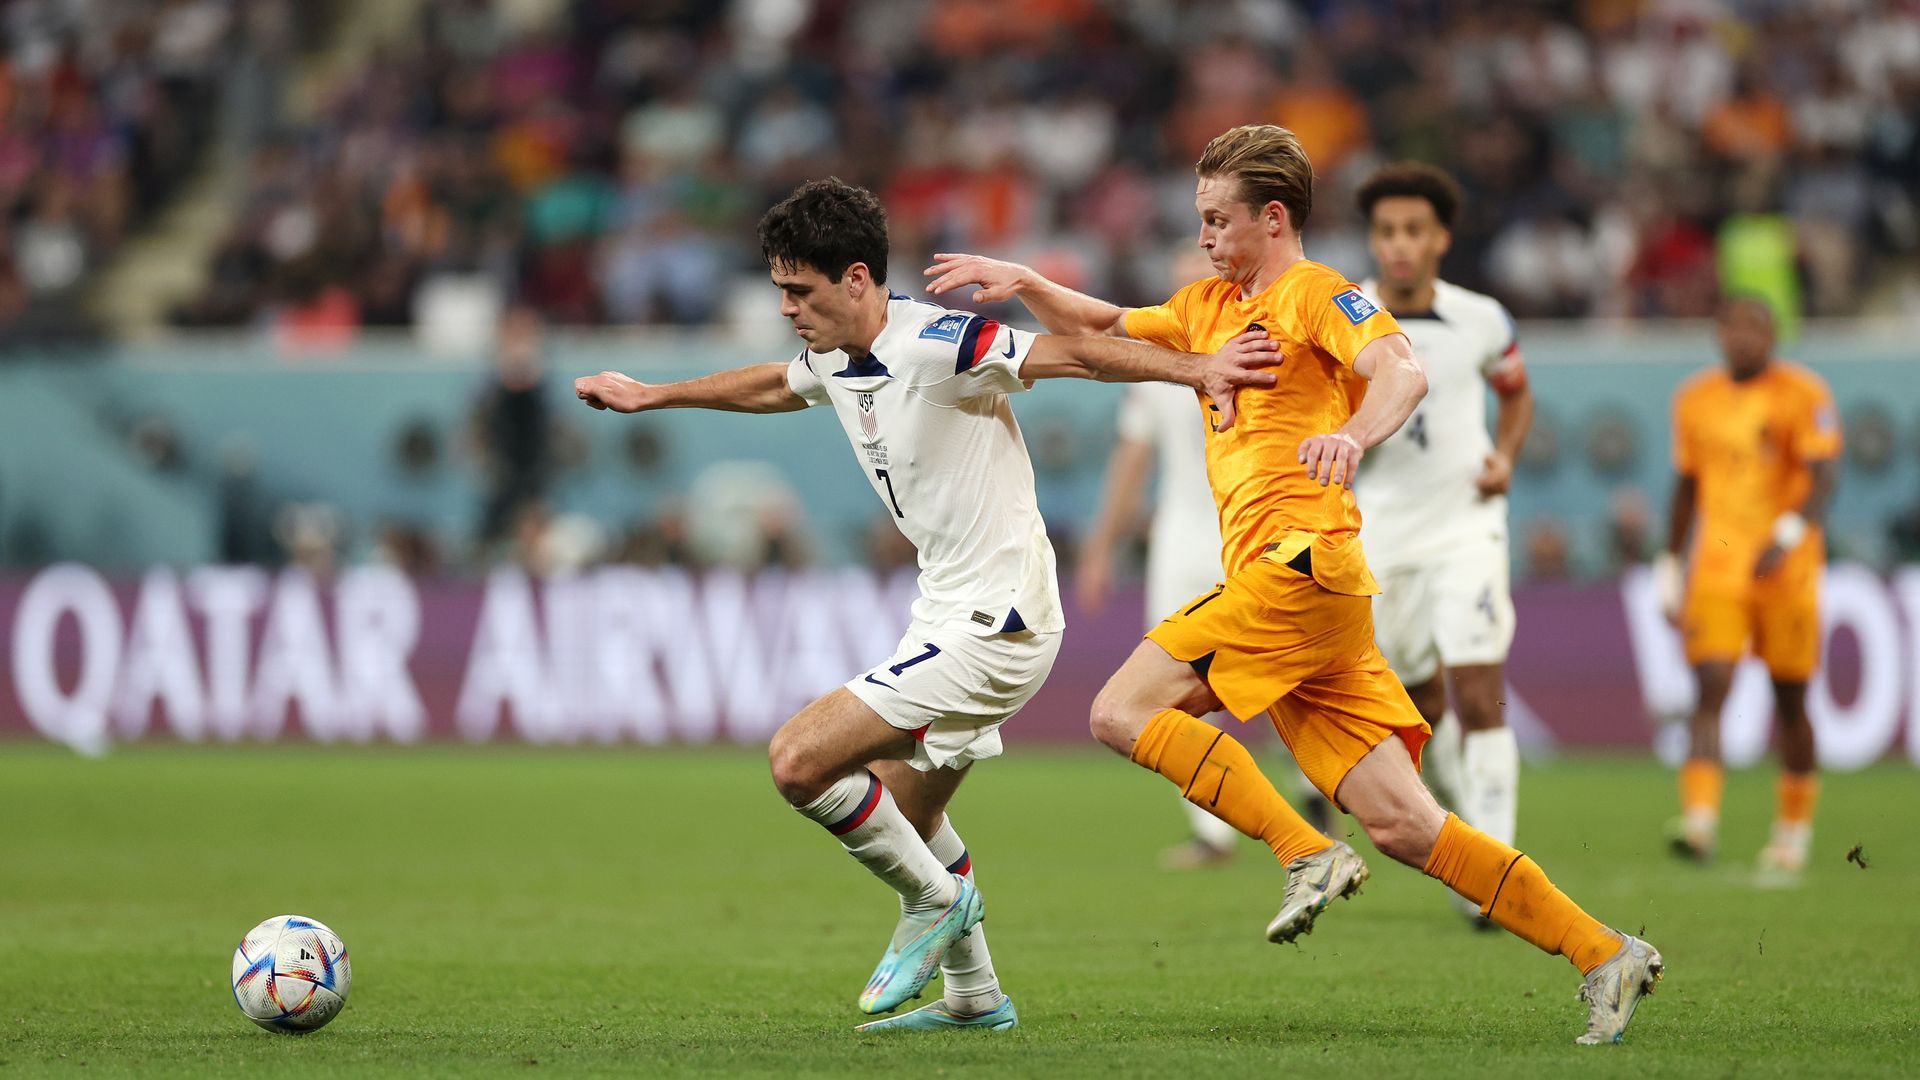 Giovanni Reyna of United States controls the ball against Frenkie de Jong of Netherlands during the FIFA World Cup Qatar 2022